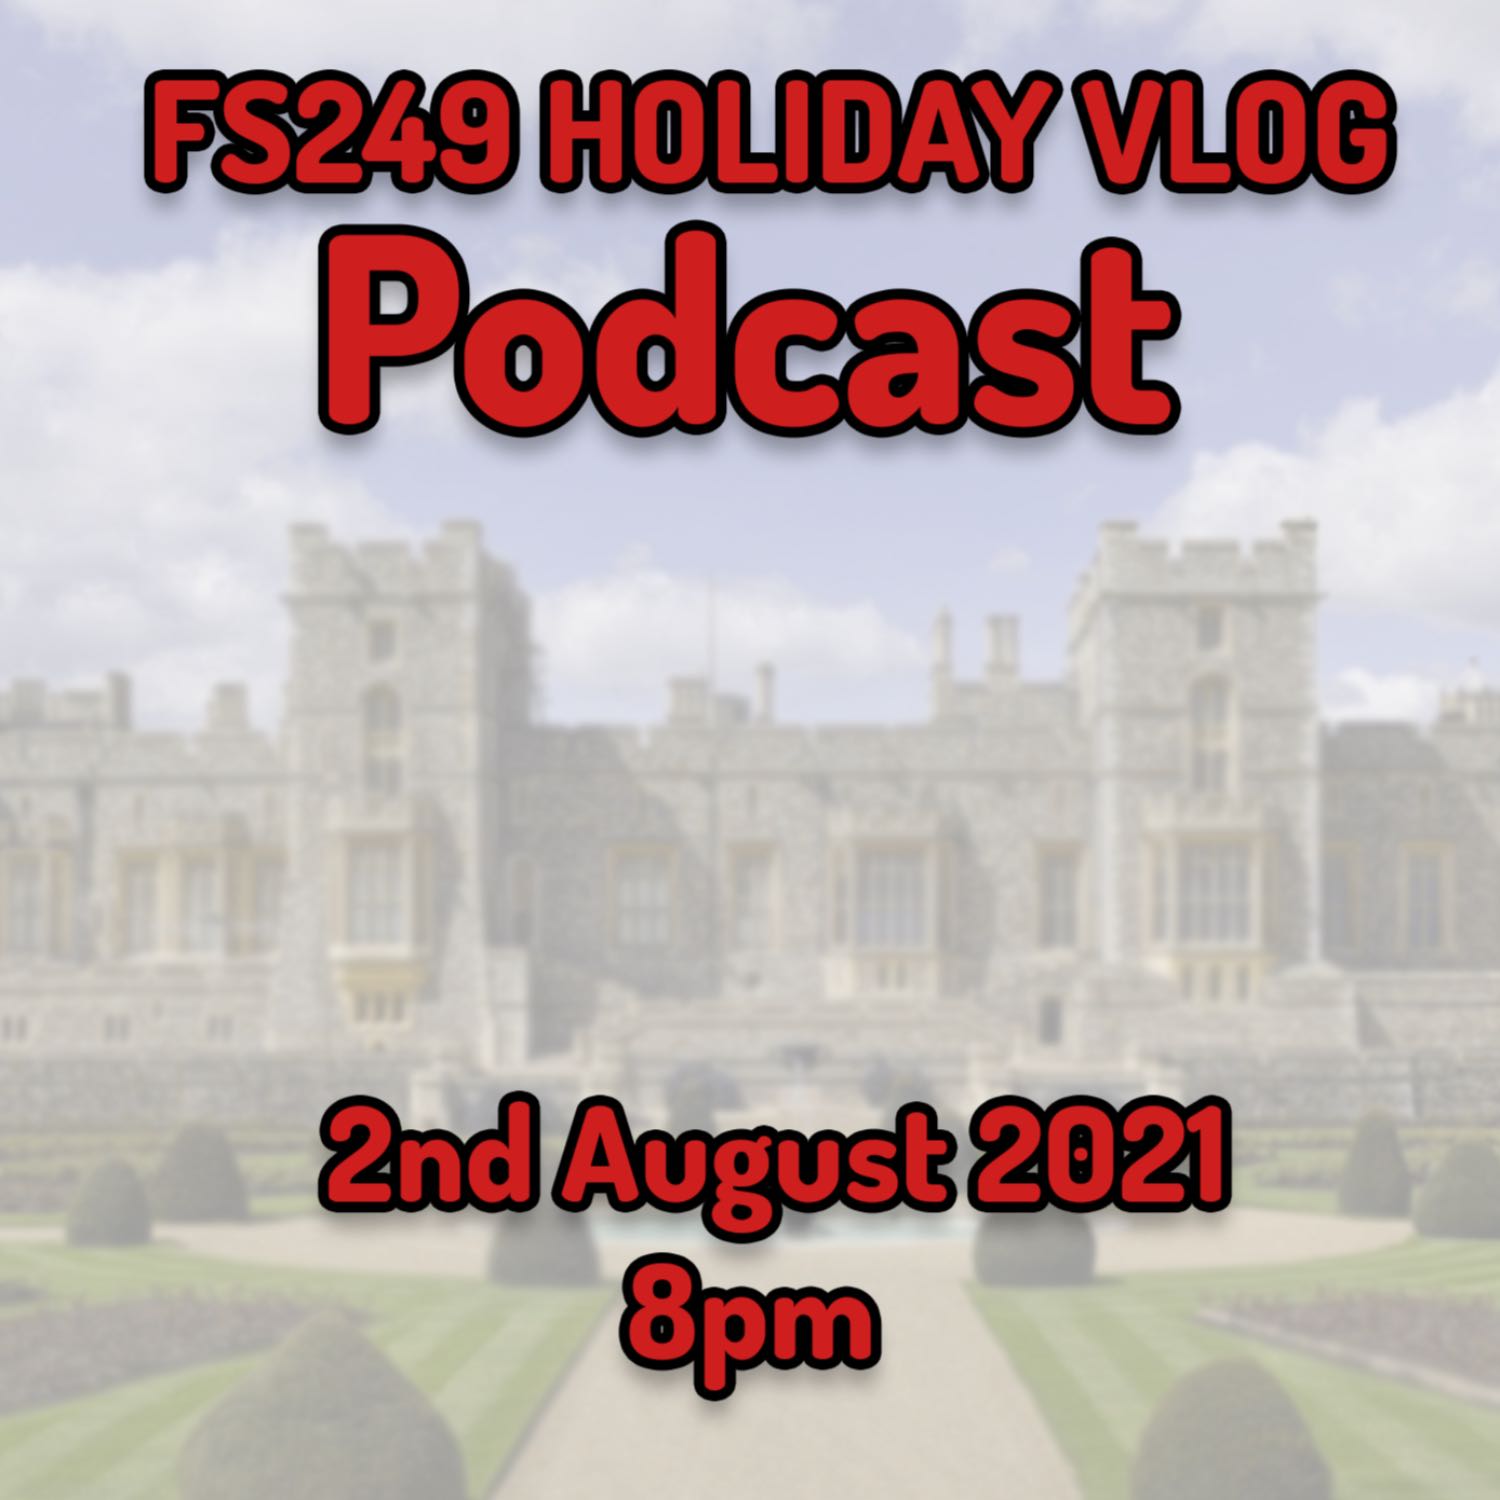 FS249 Holiday Podcast - Trailer